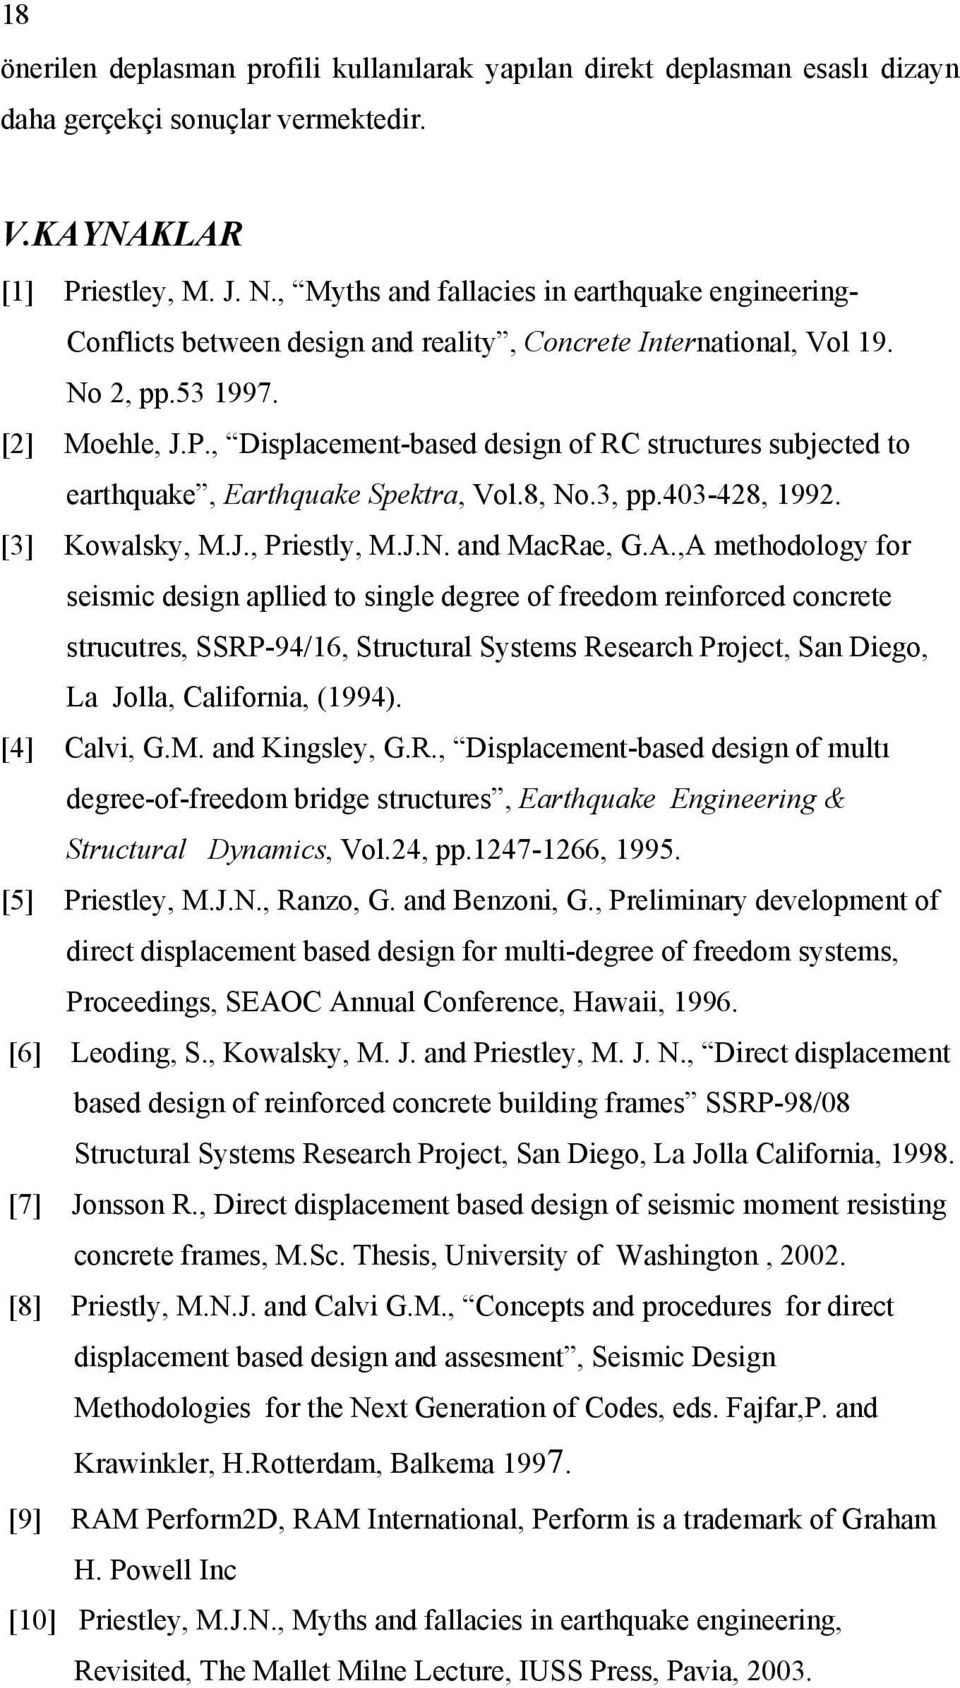 , Dsplacement-based desgn of RC structures subjected to earthquake, Earthquake Spektra, Vol.8, No.3, pp.403-428, 992. [3] Kowalsky, M.J., Prestly, M.J.N. and MacRae, G.A.